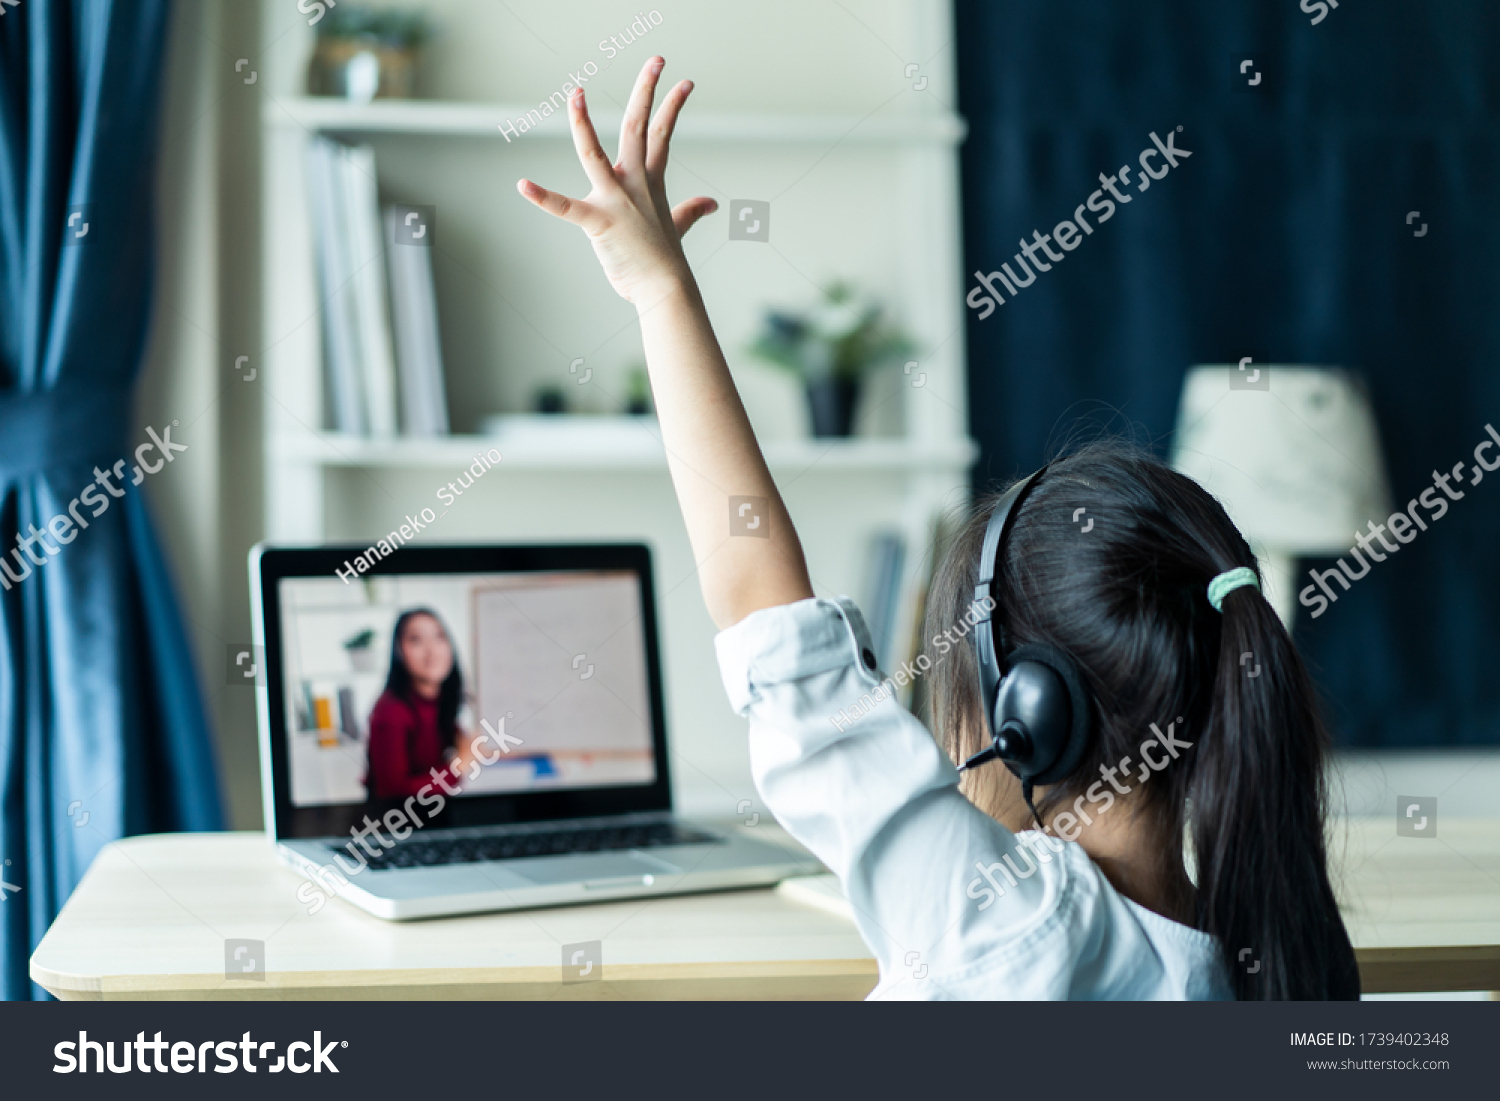 Homeschool Asian little young girl student learning virtual internet online class from school teacher by remote meeting due to covid pandemic. Female teaching math by using headphone and whiteboard. #1739402348